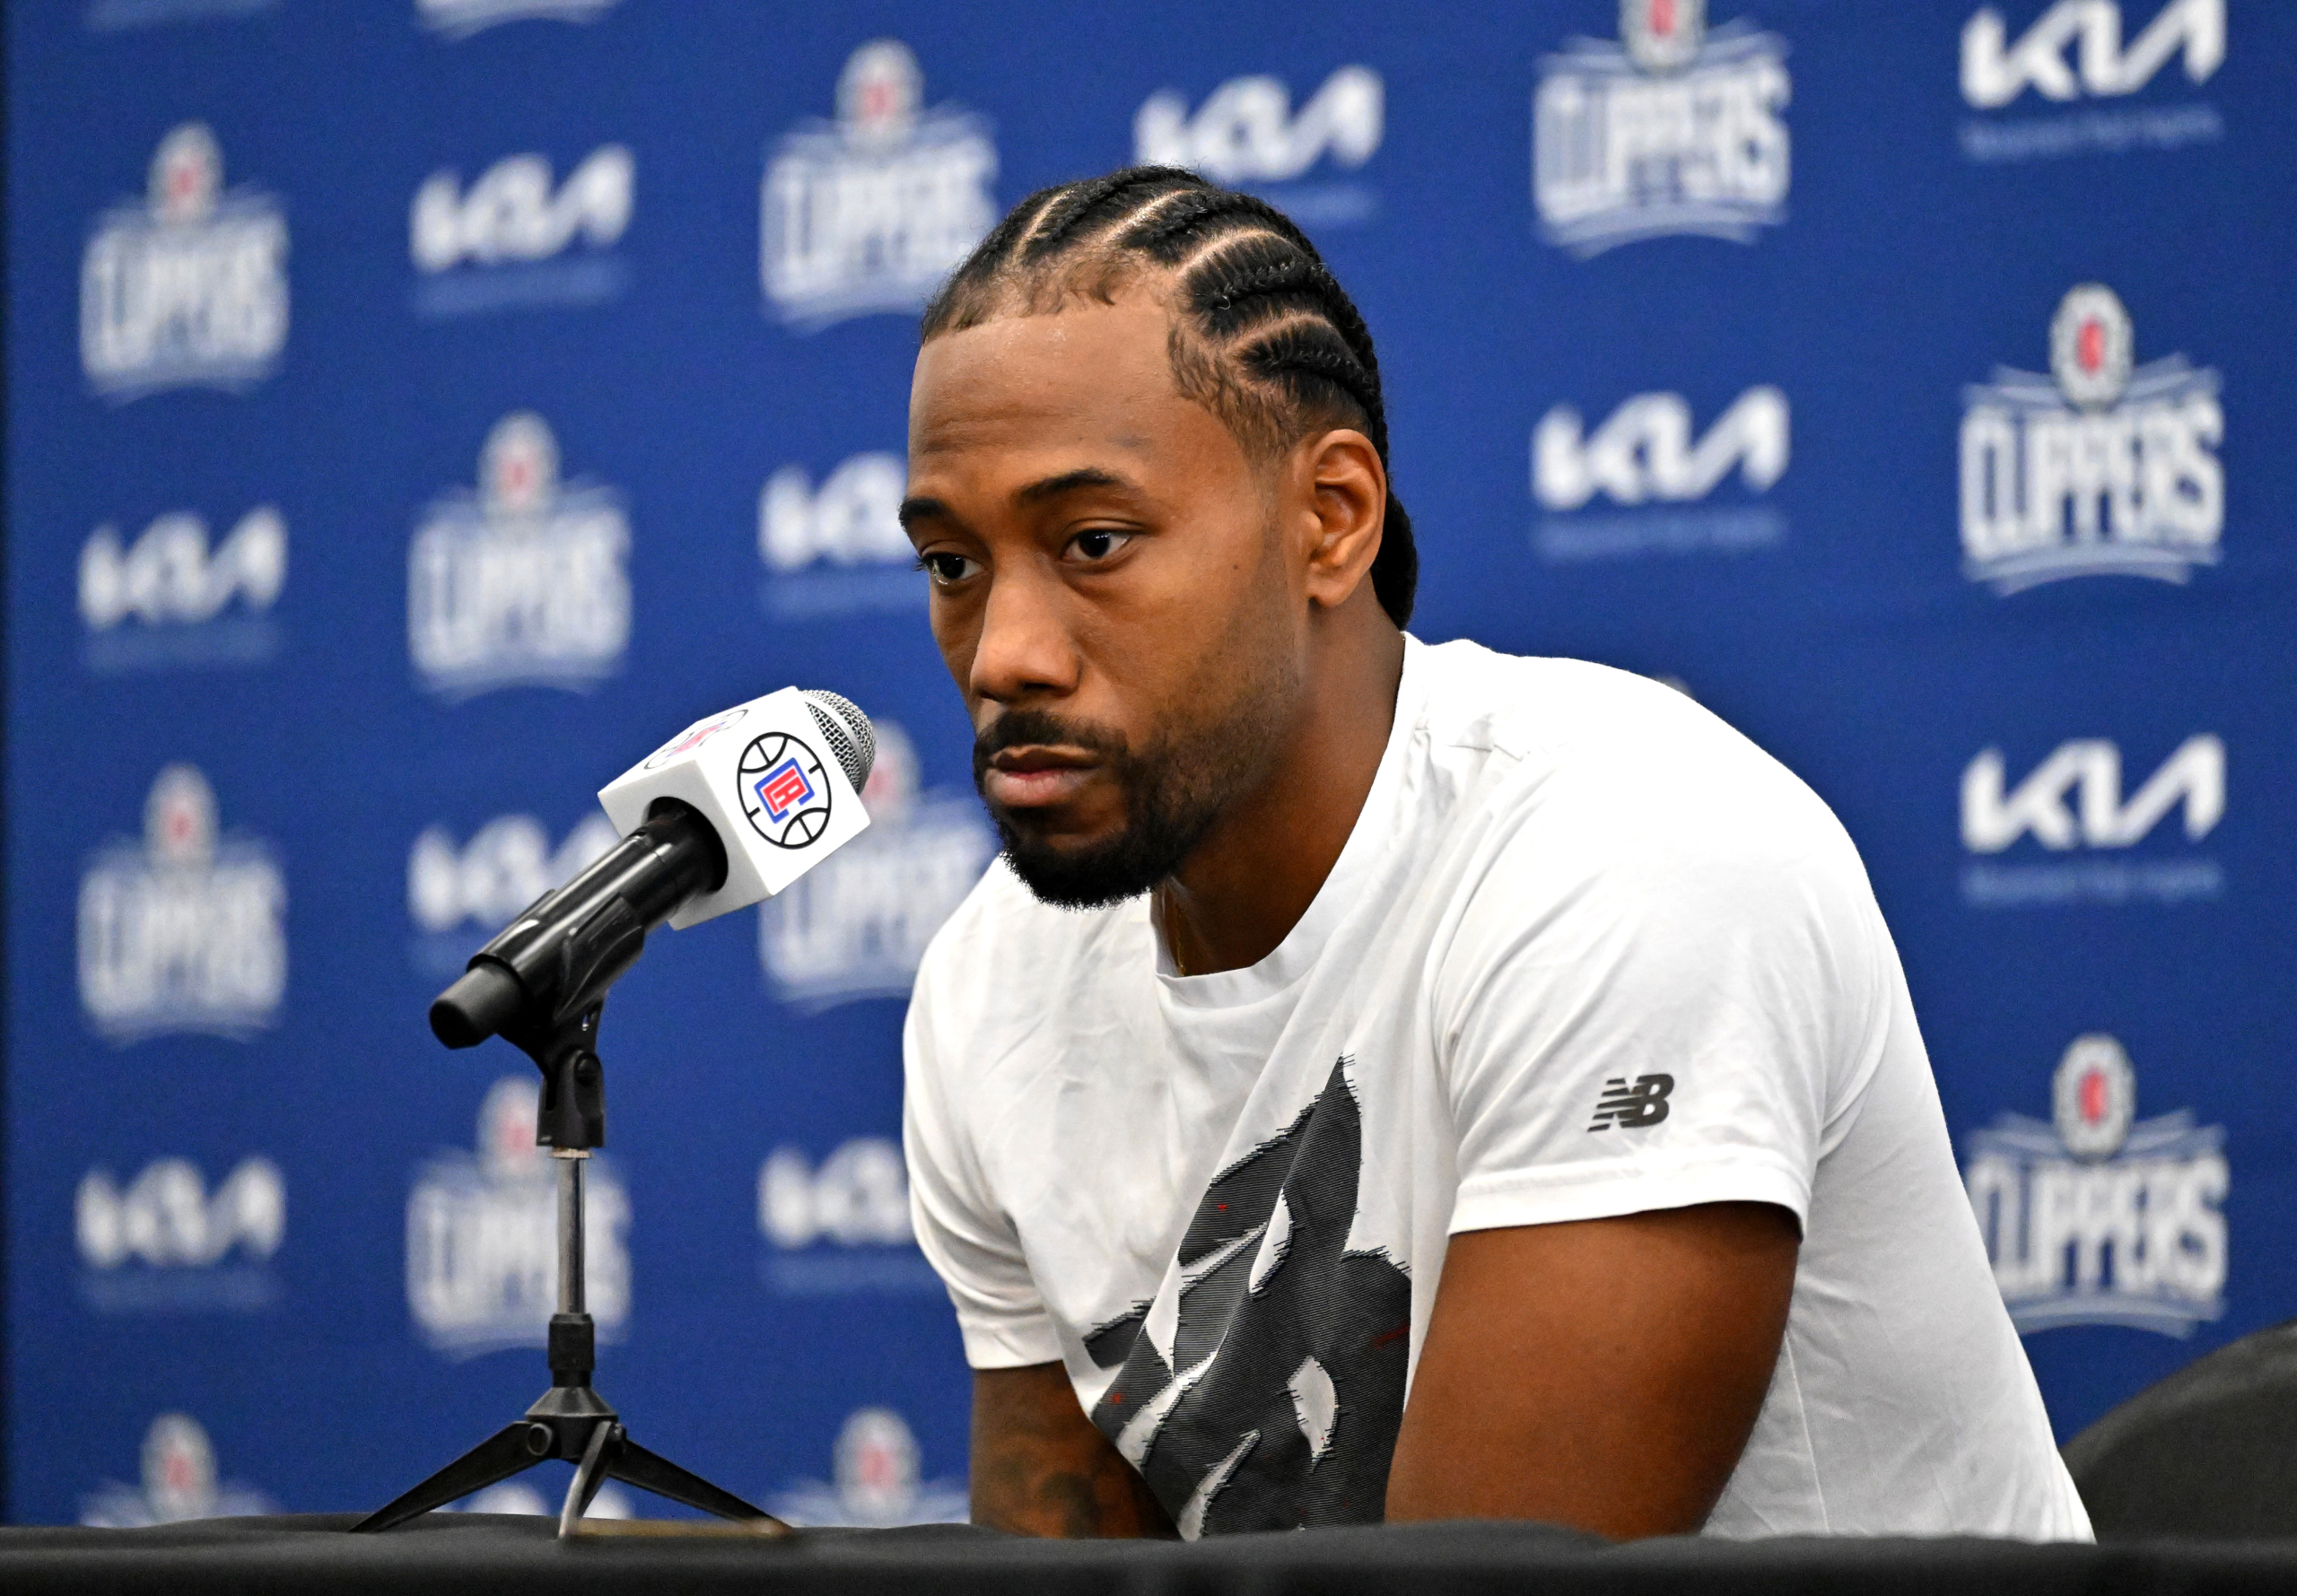 Kawhi Leonard could have unfamiliar role in return to the Los Angeles Clippers